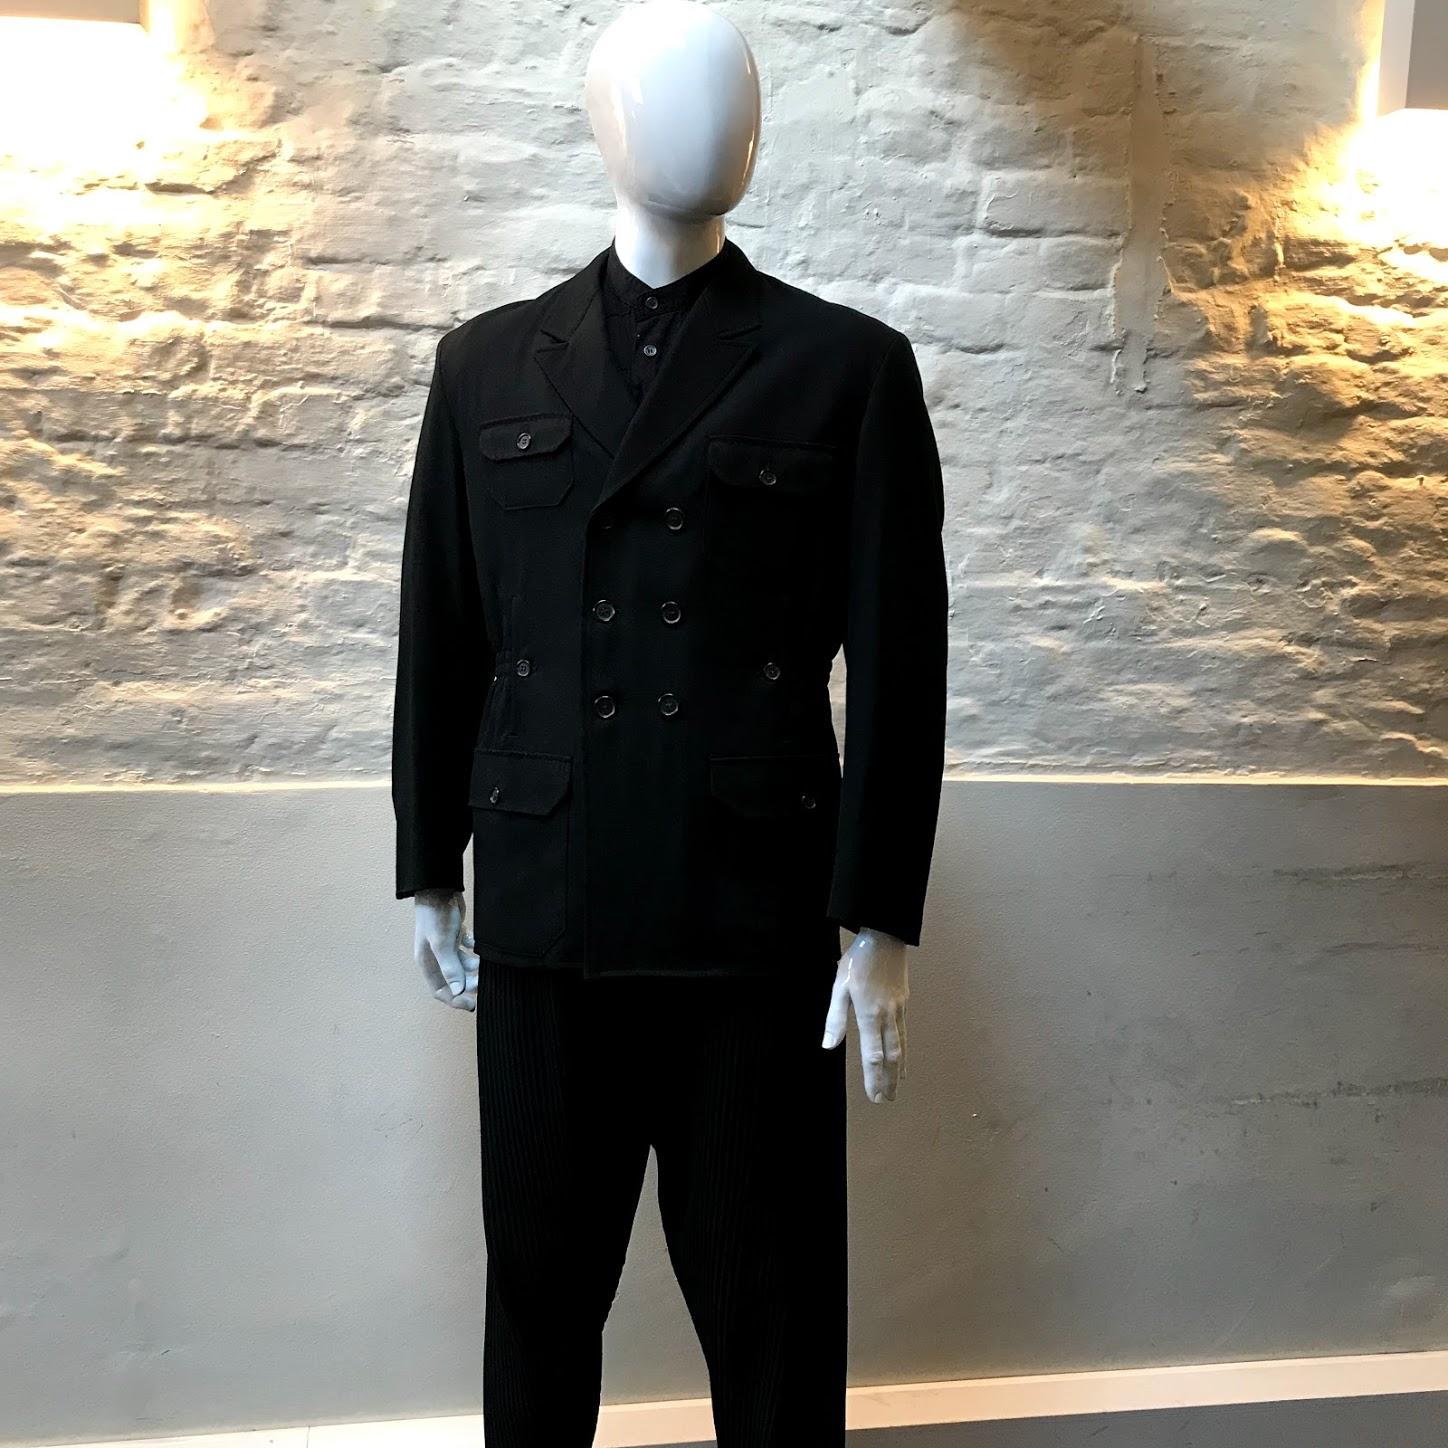 Yohji Yamamoto Military Style Jacket made in Japan from cotton. 

Yohji Yamamoto is known for the avant-garde spirit of his clothing. His signature oversized silhouettes in black often feature drapery in varying textures. Since the establishment of